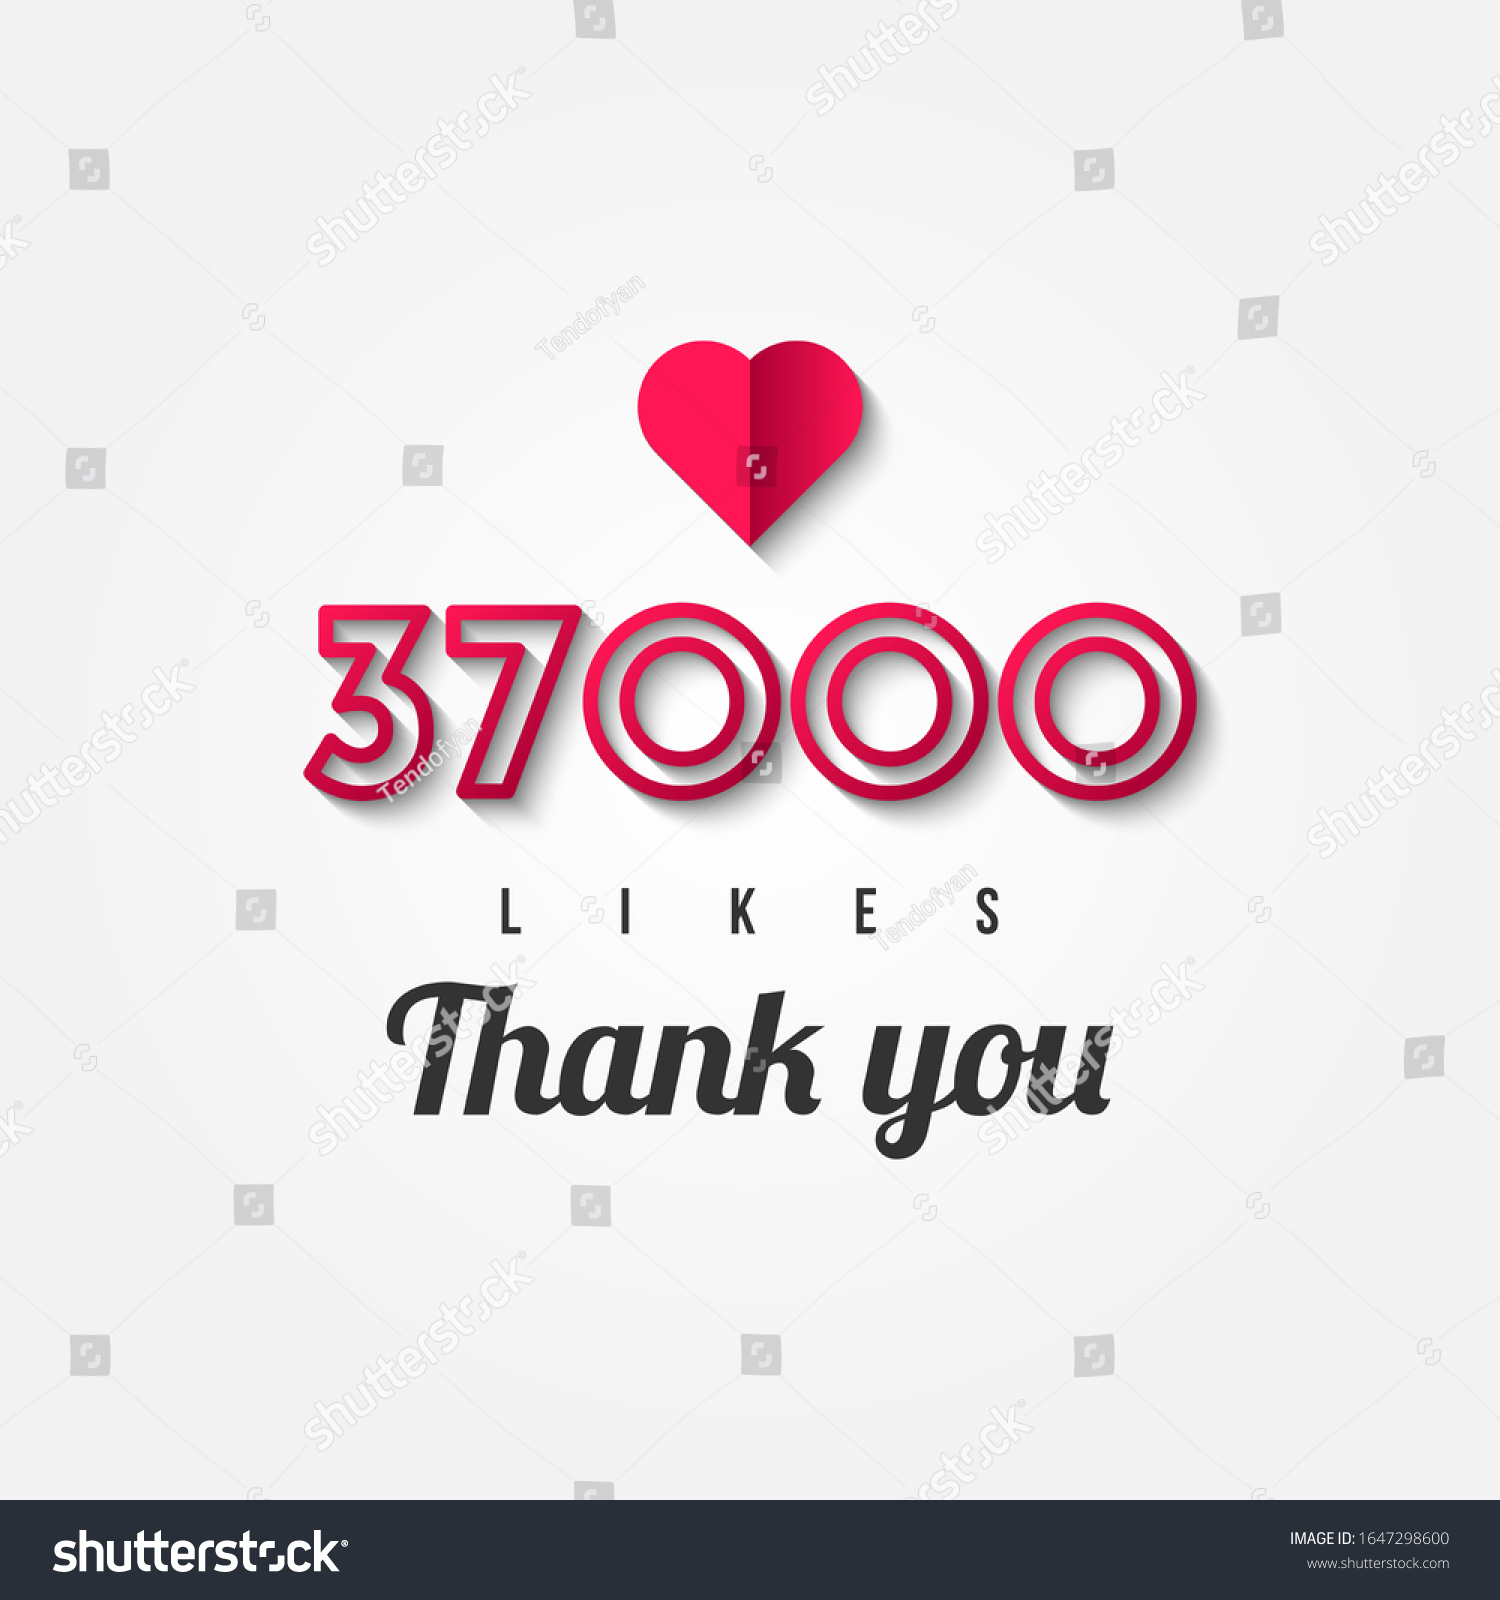 SVG of Thank You 37000 Likes Vector Illustration Template Design svg